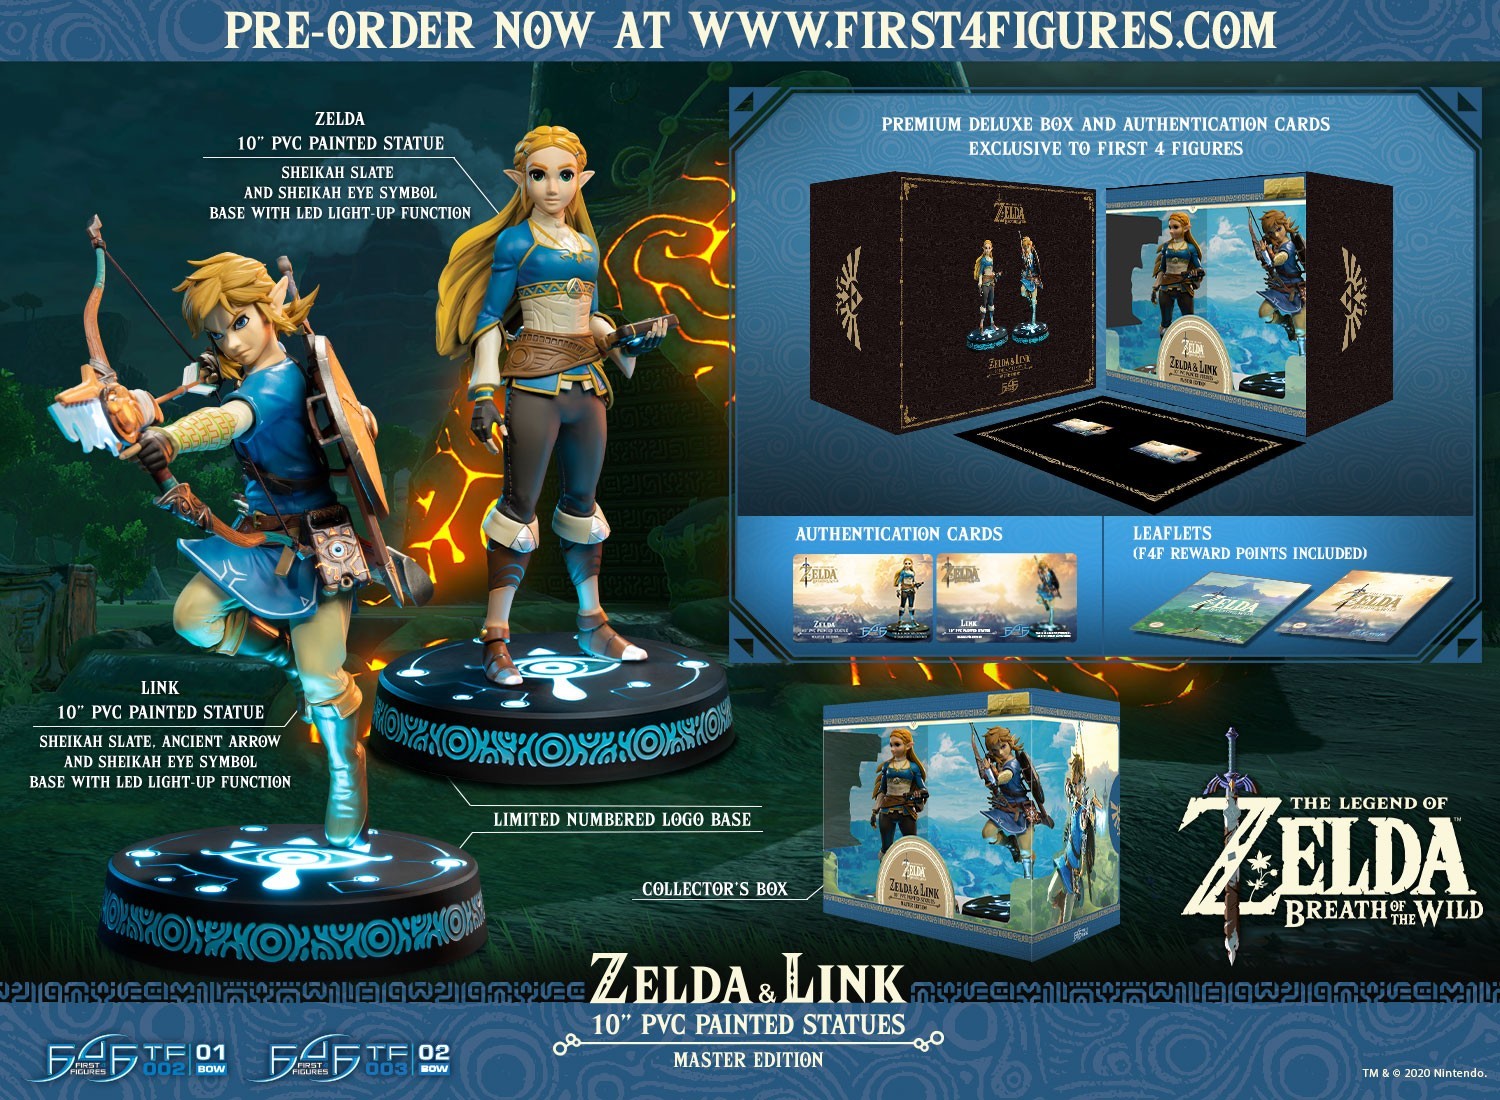 LED-lit Link and Zelda figures from First 4 Figures